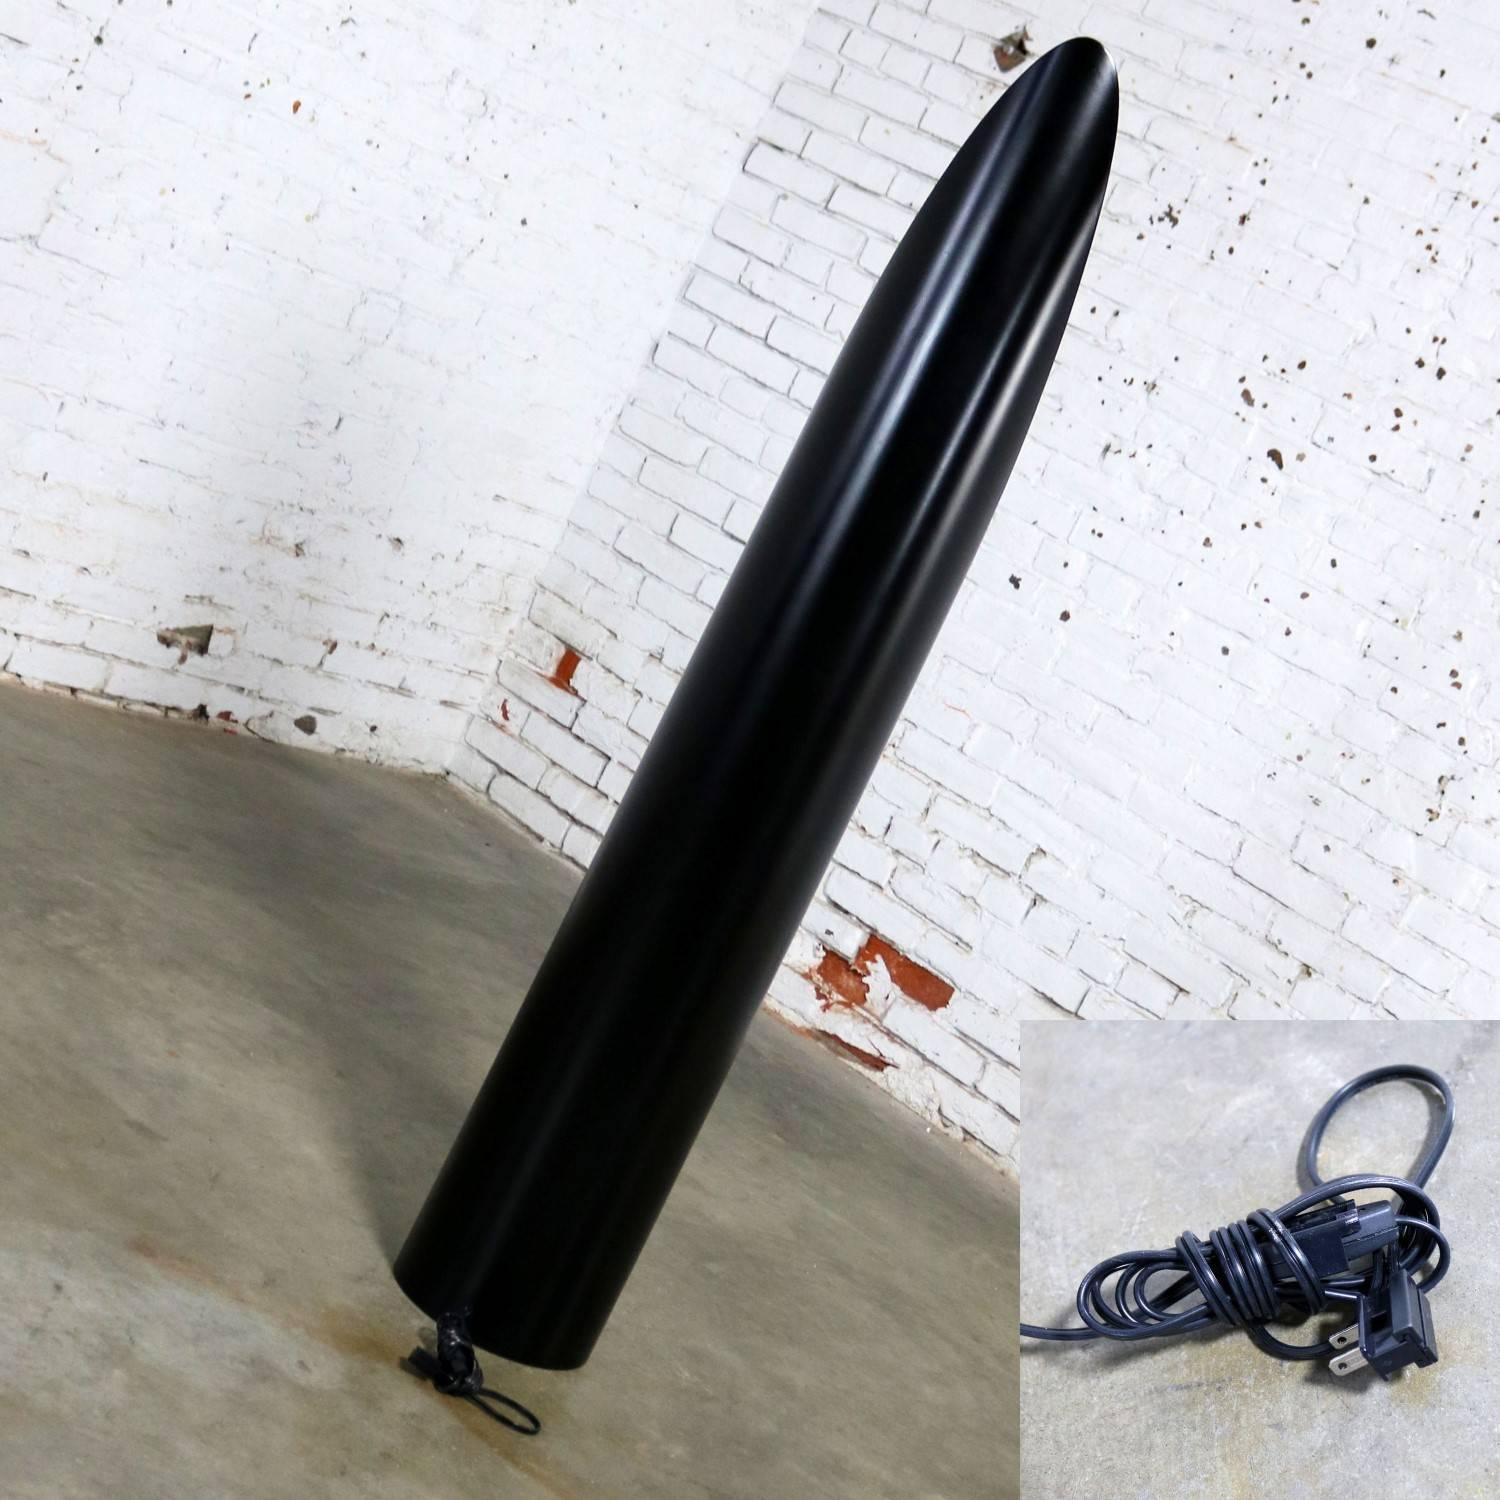 20th Century Modern Black and White Fiberglass Cylinder Floor Lamp with Elliptical Opening